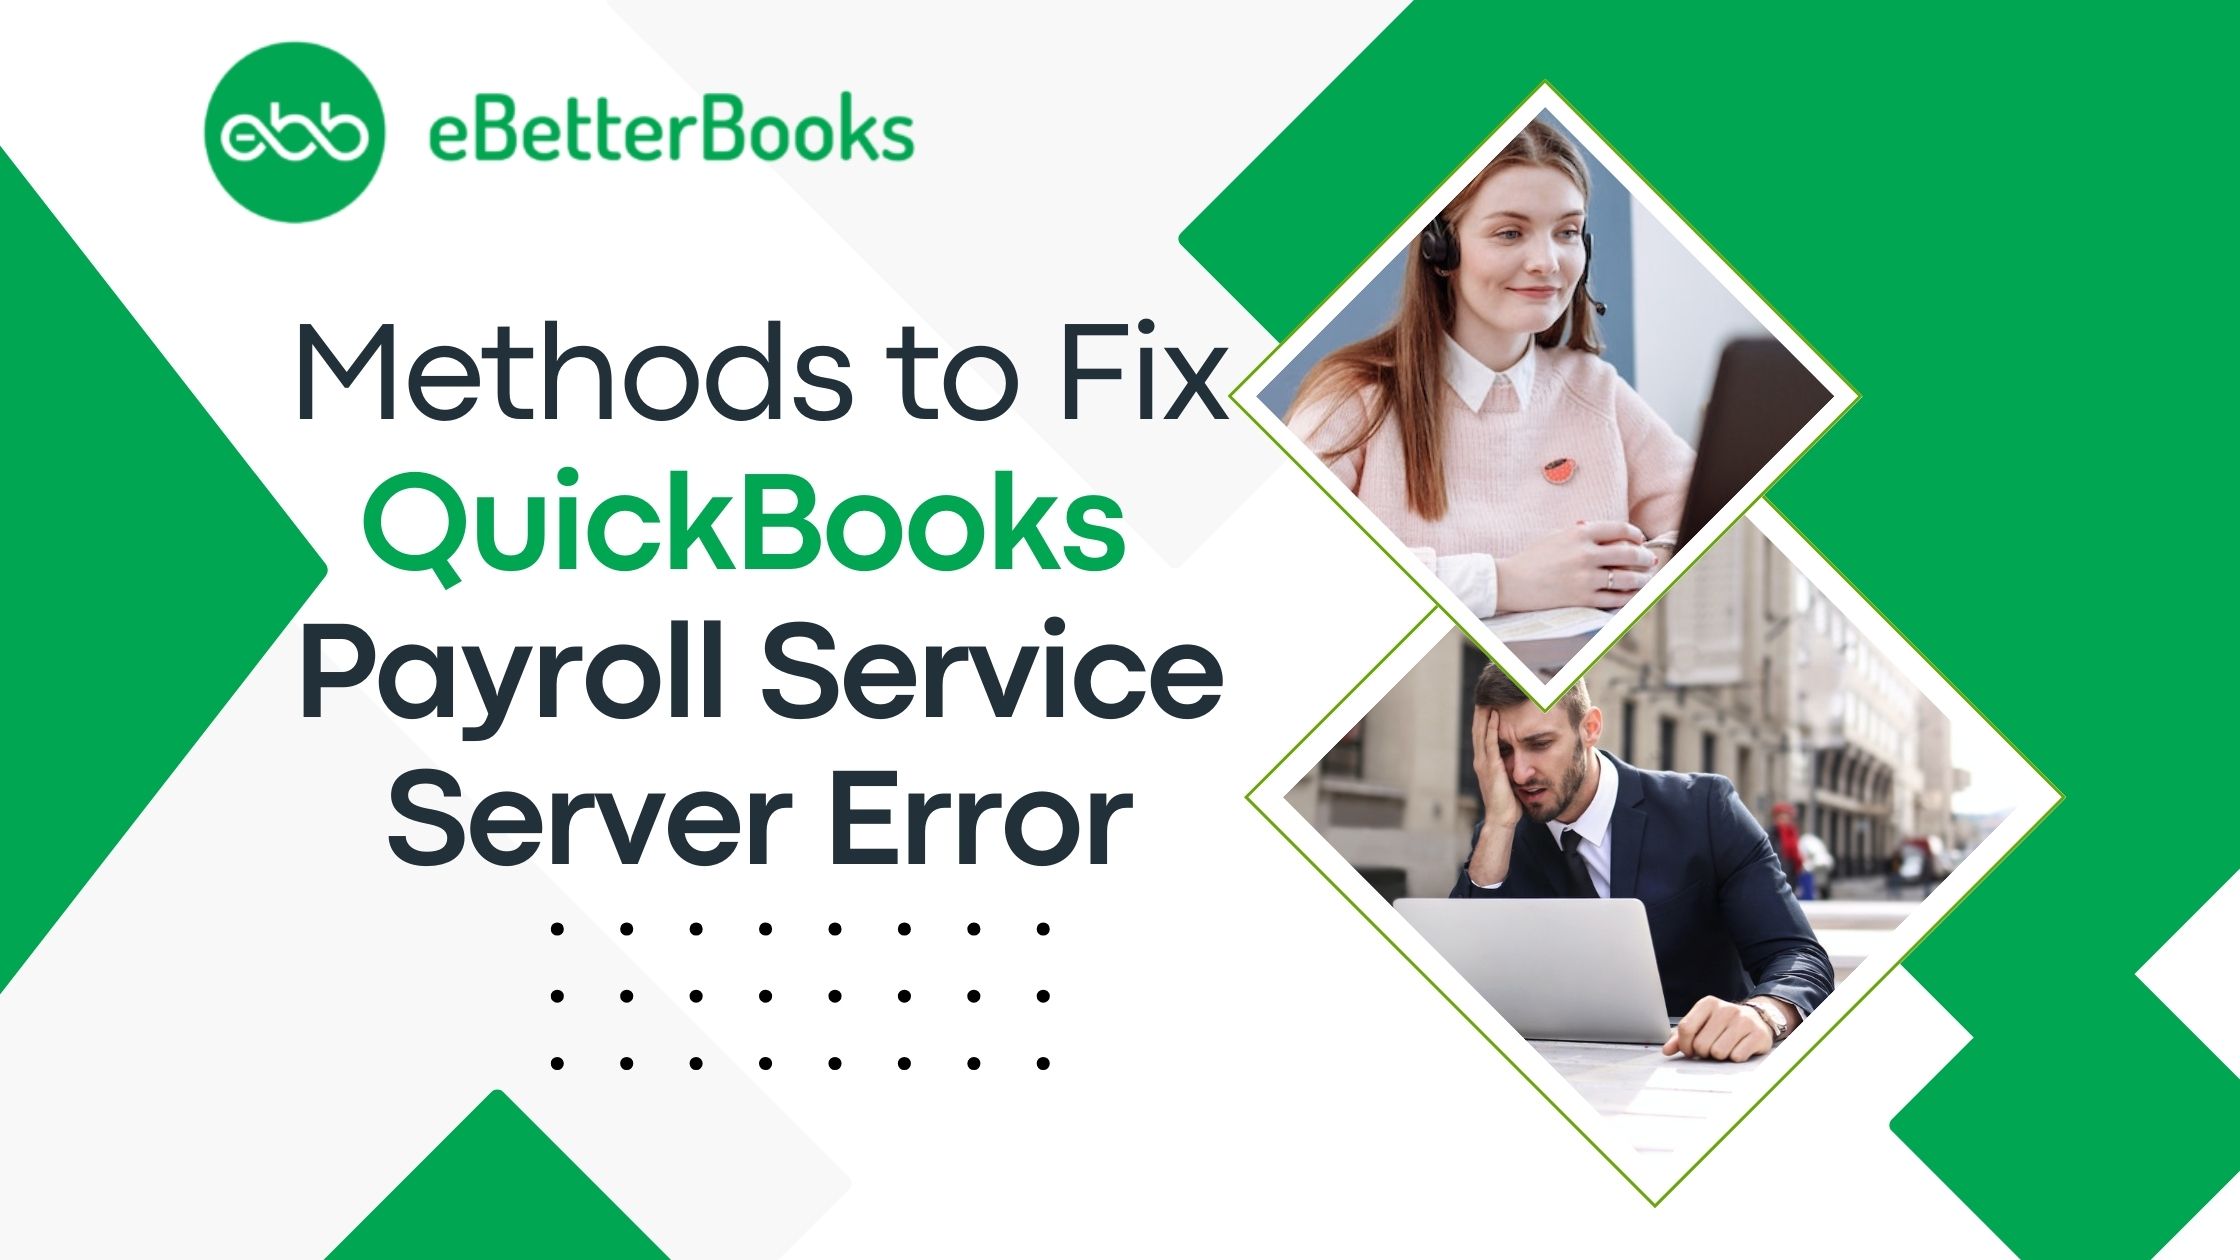 How to Troubleshooting QuickBooks Payroll Service Server Error - Connection Error